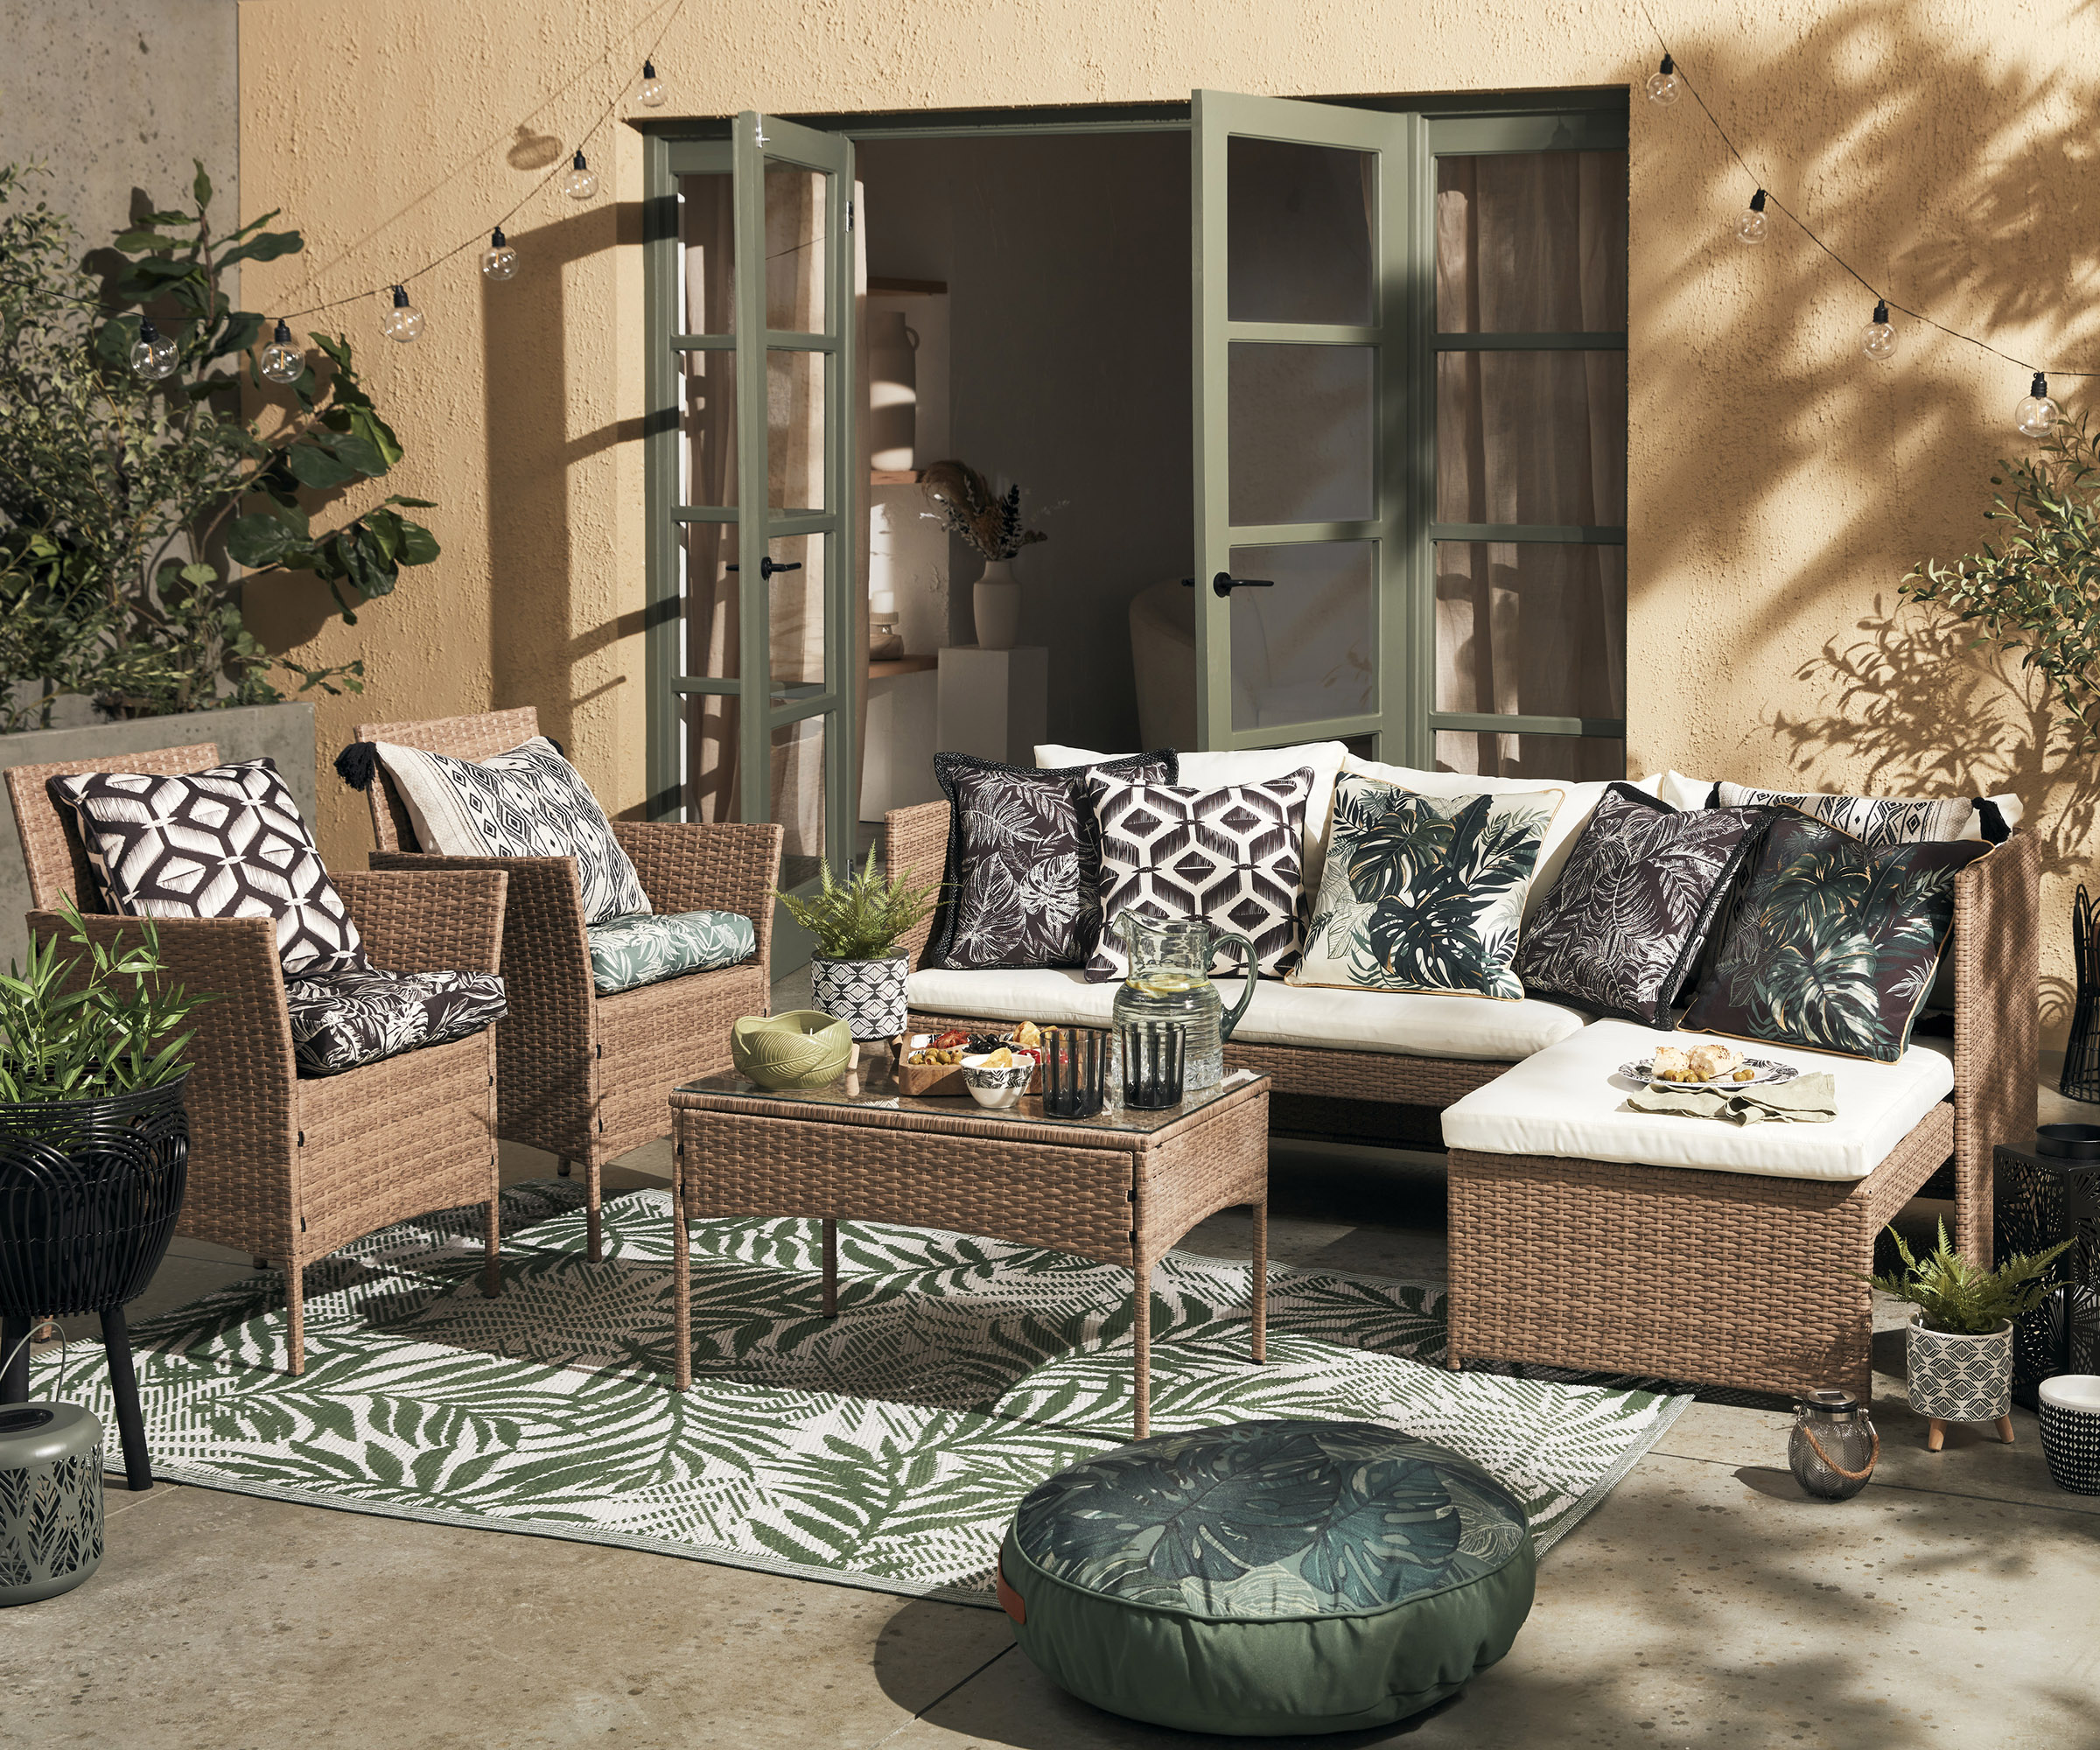 A garden furniture set covered in cushions on an outdoor rug